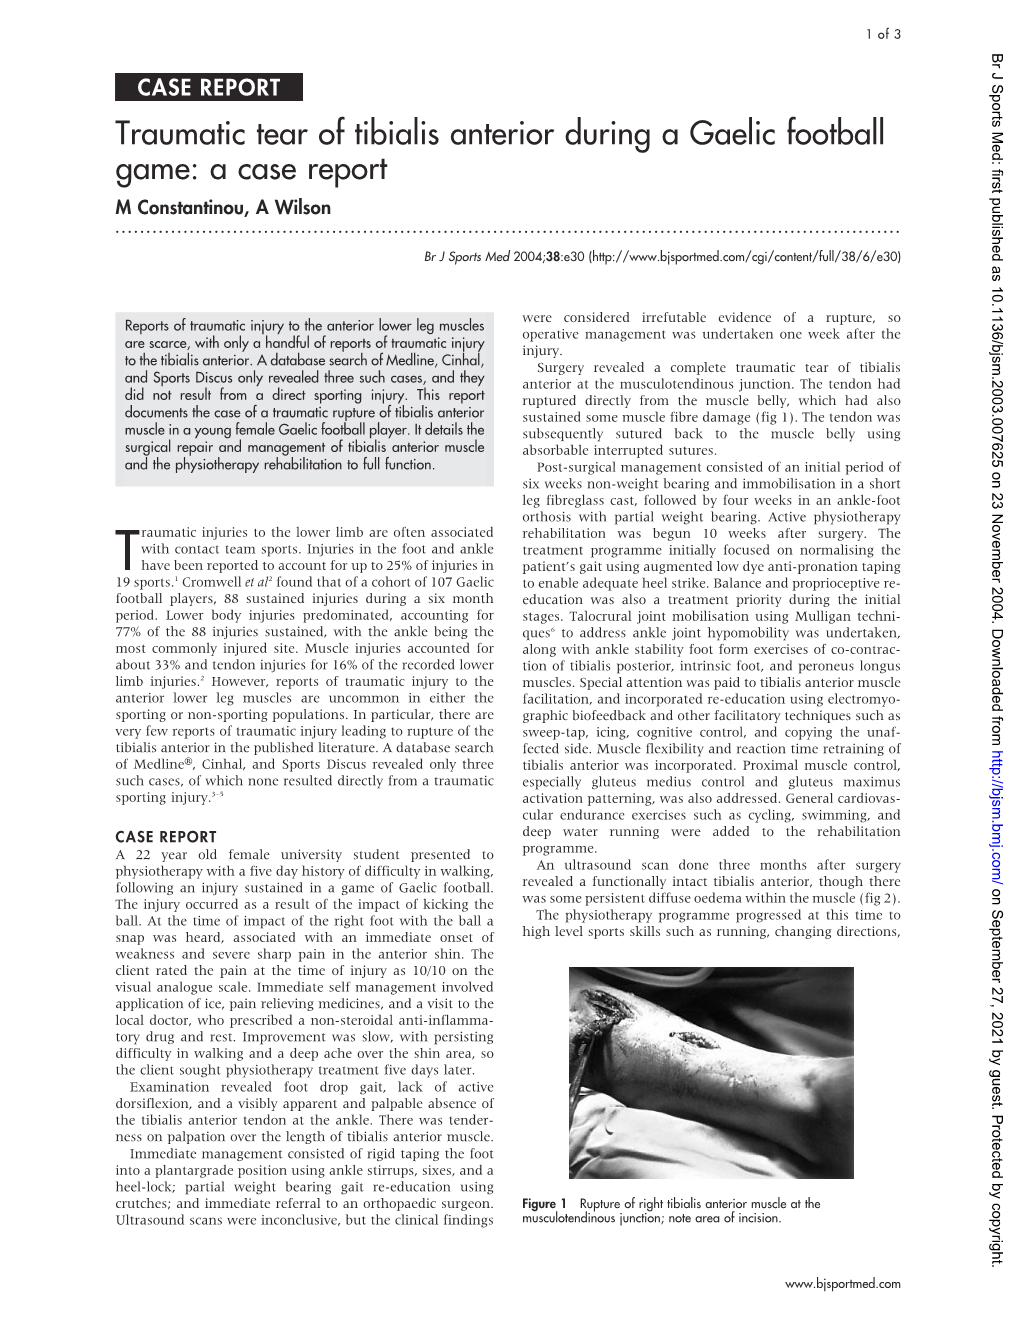 Traumatic Tear of Tibialis Anterior During a Gaelic Football Game: a Case Report M Constantinou, a Wilson